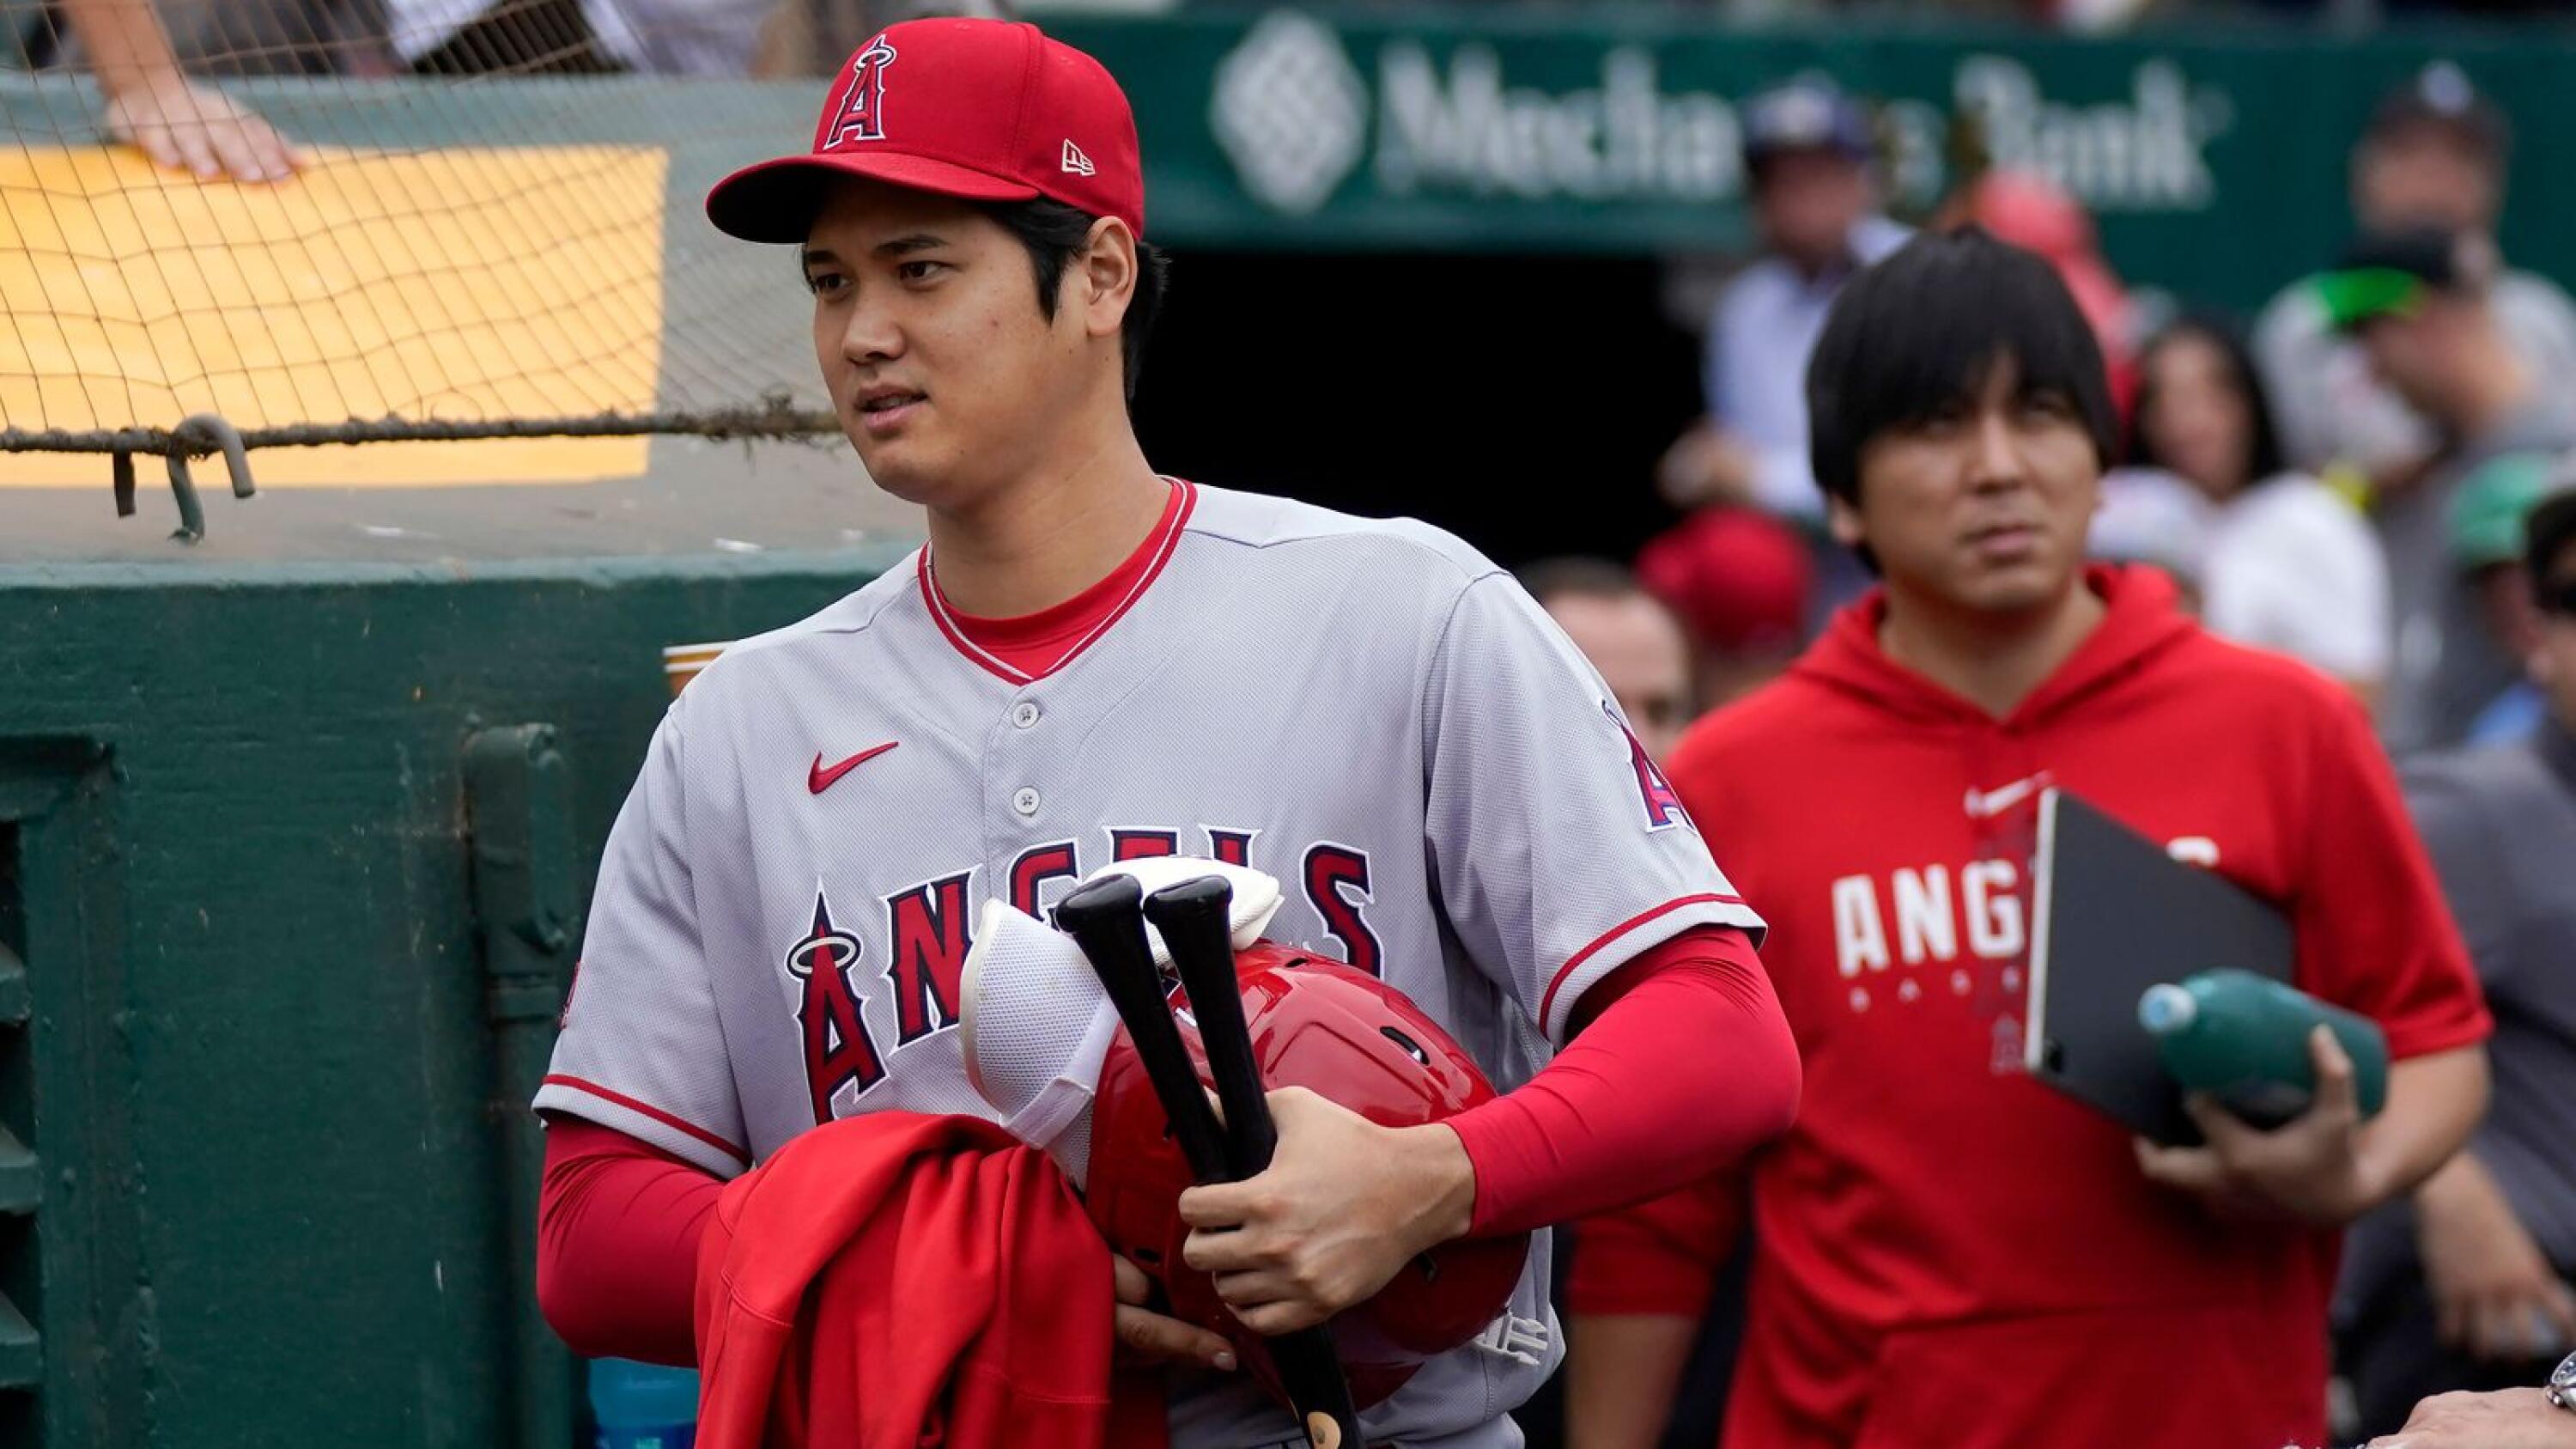 Shohei Ohtani of the Los Angeles Angels after walking against the